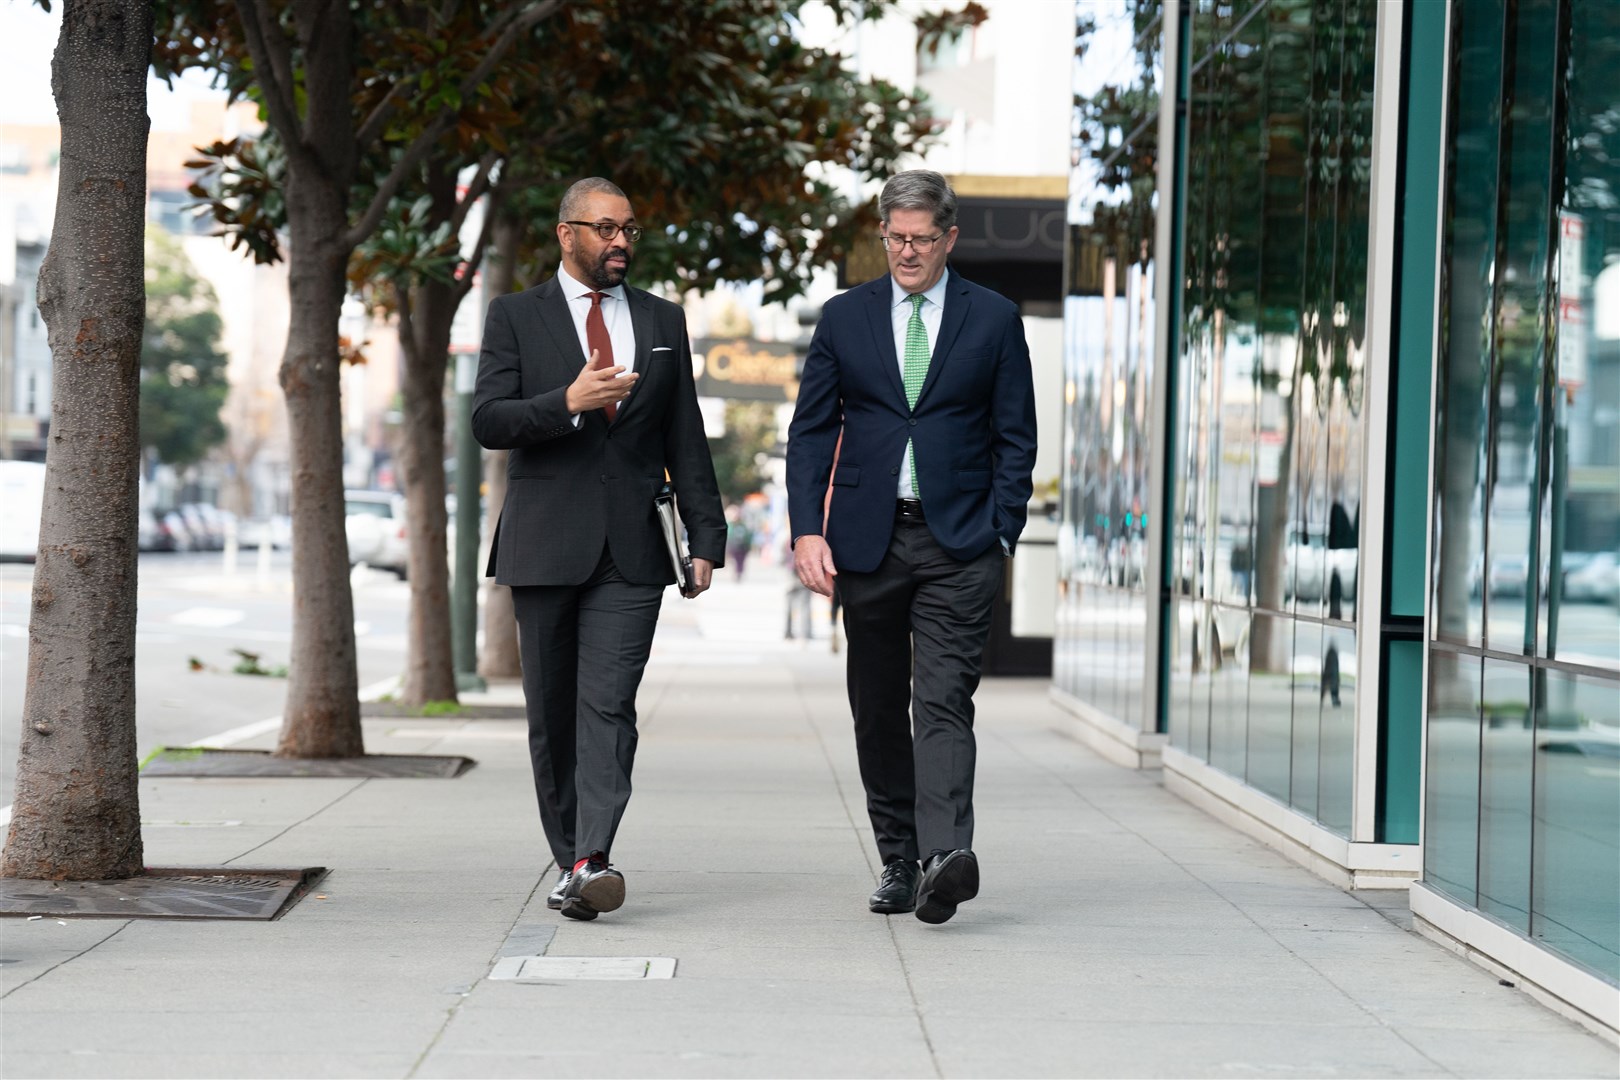 Home Secretary James Cleverly (left) also met with Clint Smith, chief legal officer of the social media platform Discord in San Francisco on Monday (Stefan Rousseau, PA)